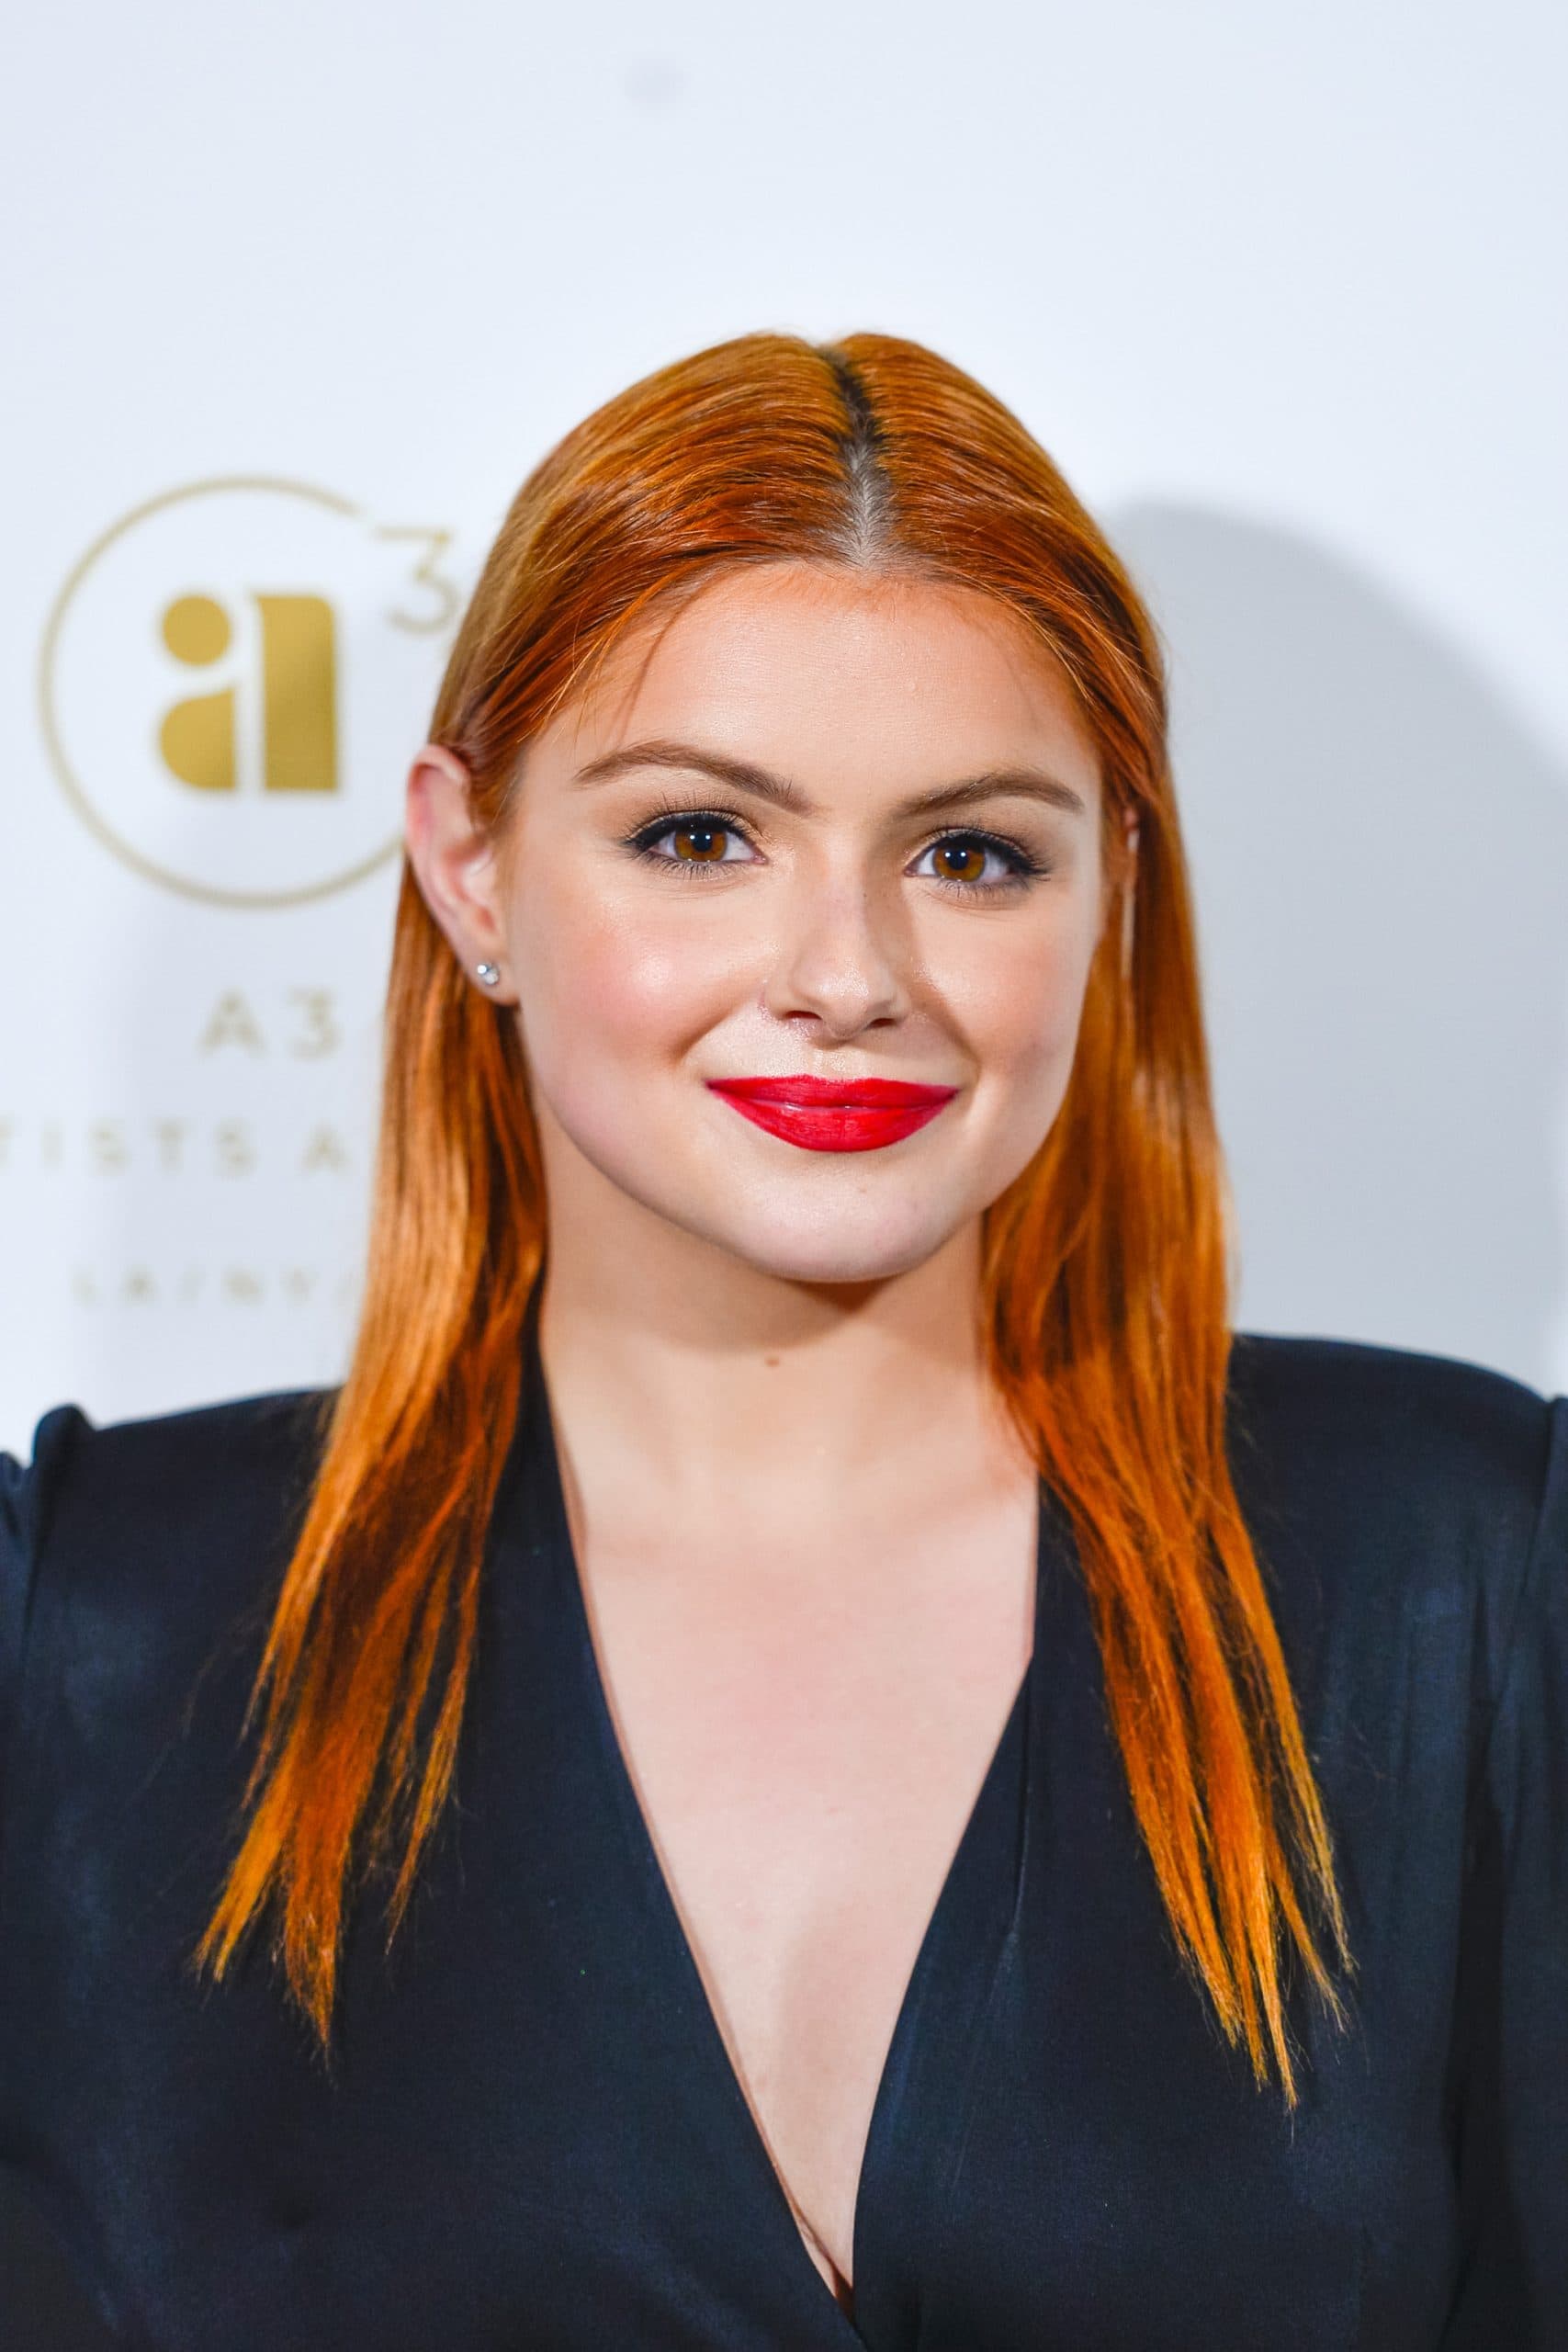 Actress Ariel Winter attends the Wags & Walks 10th Annual Gala